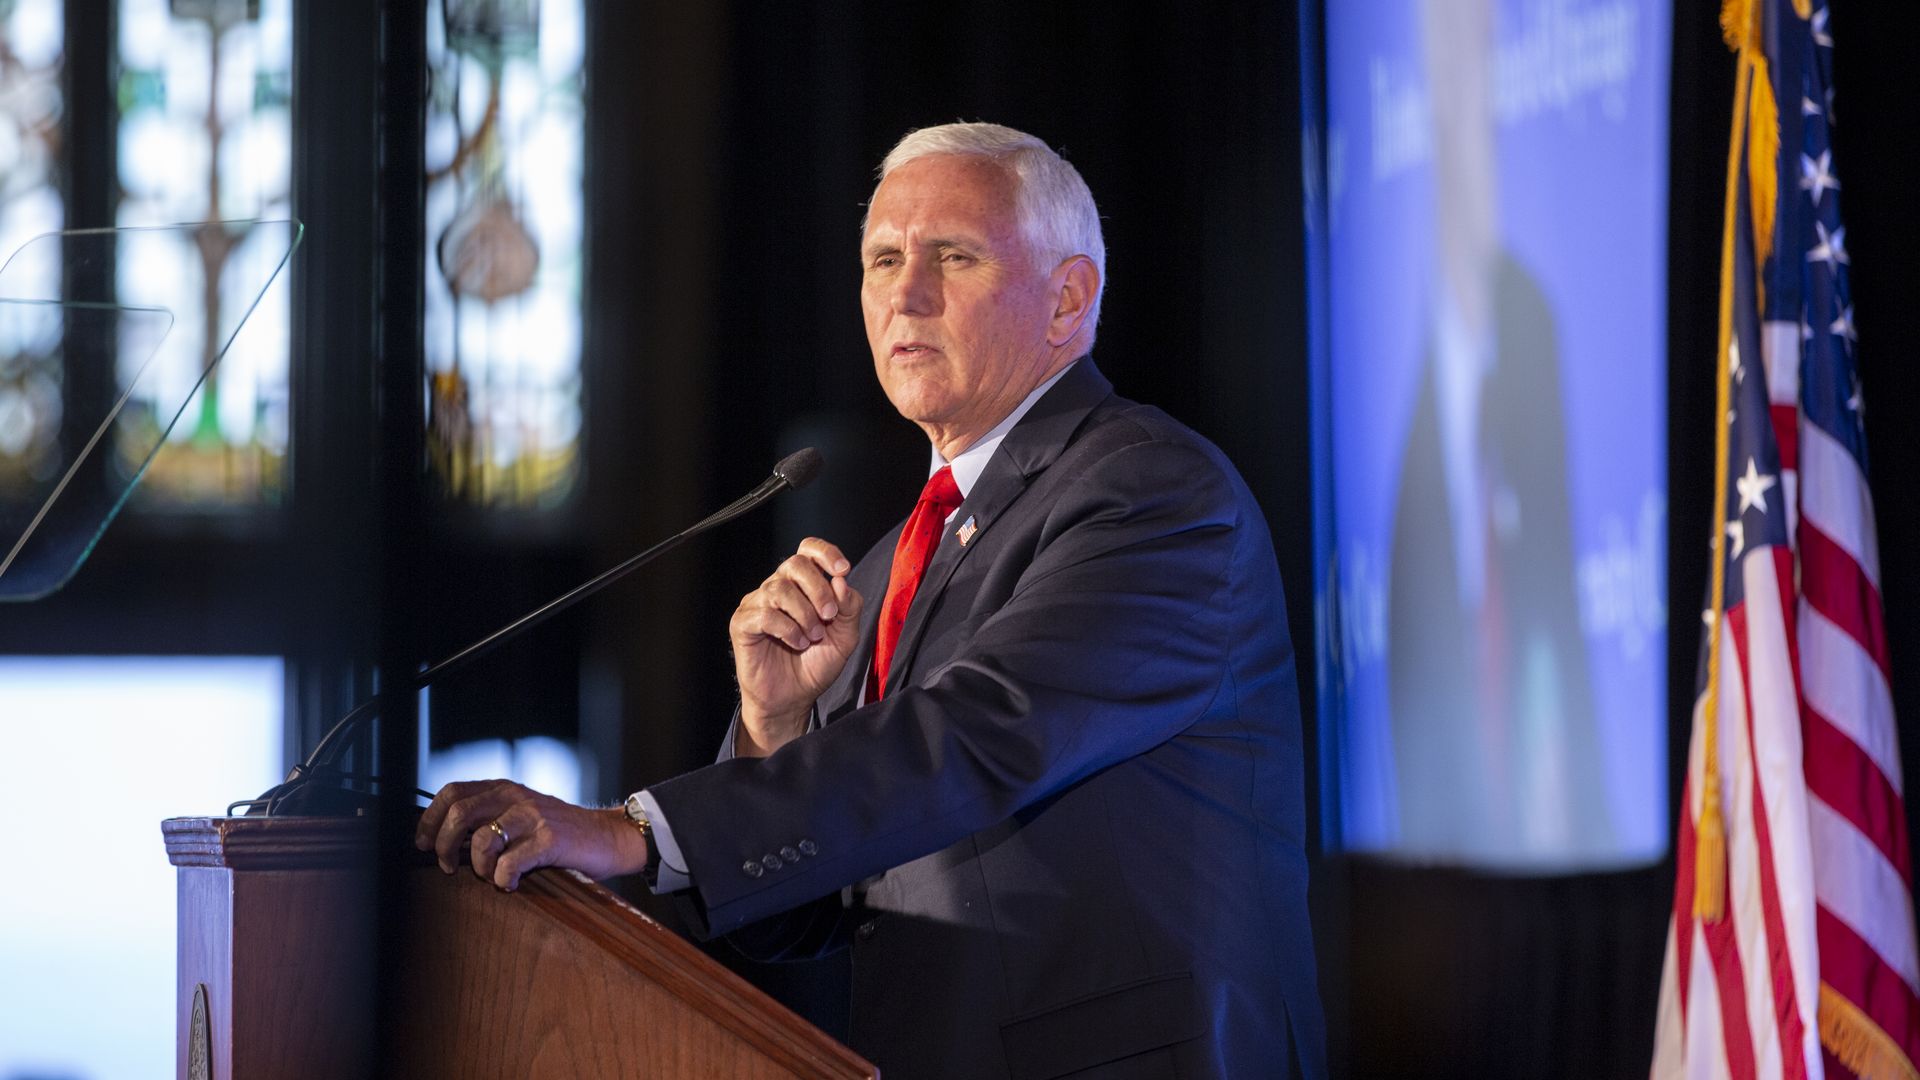 Former Vice President Mike Pence speaks to a crowd of supporters at the University Club of Chicago on June 20, 2022 in Chicago, Illinois